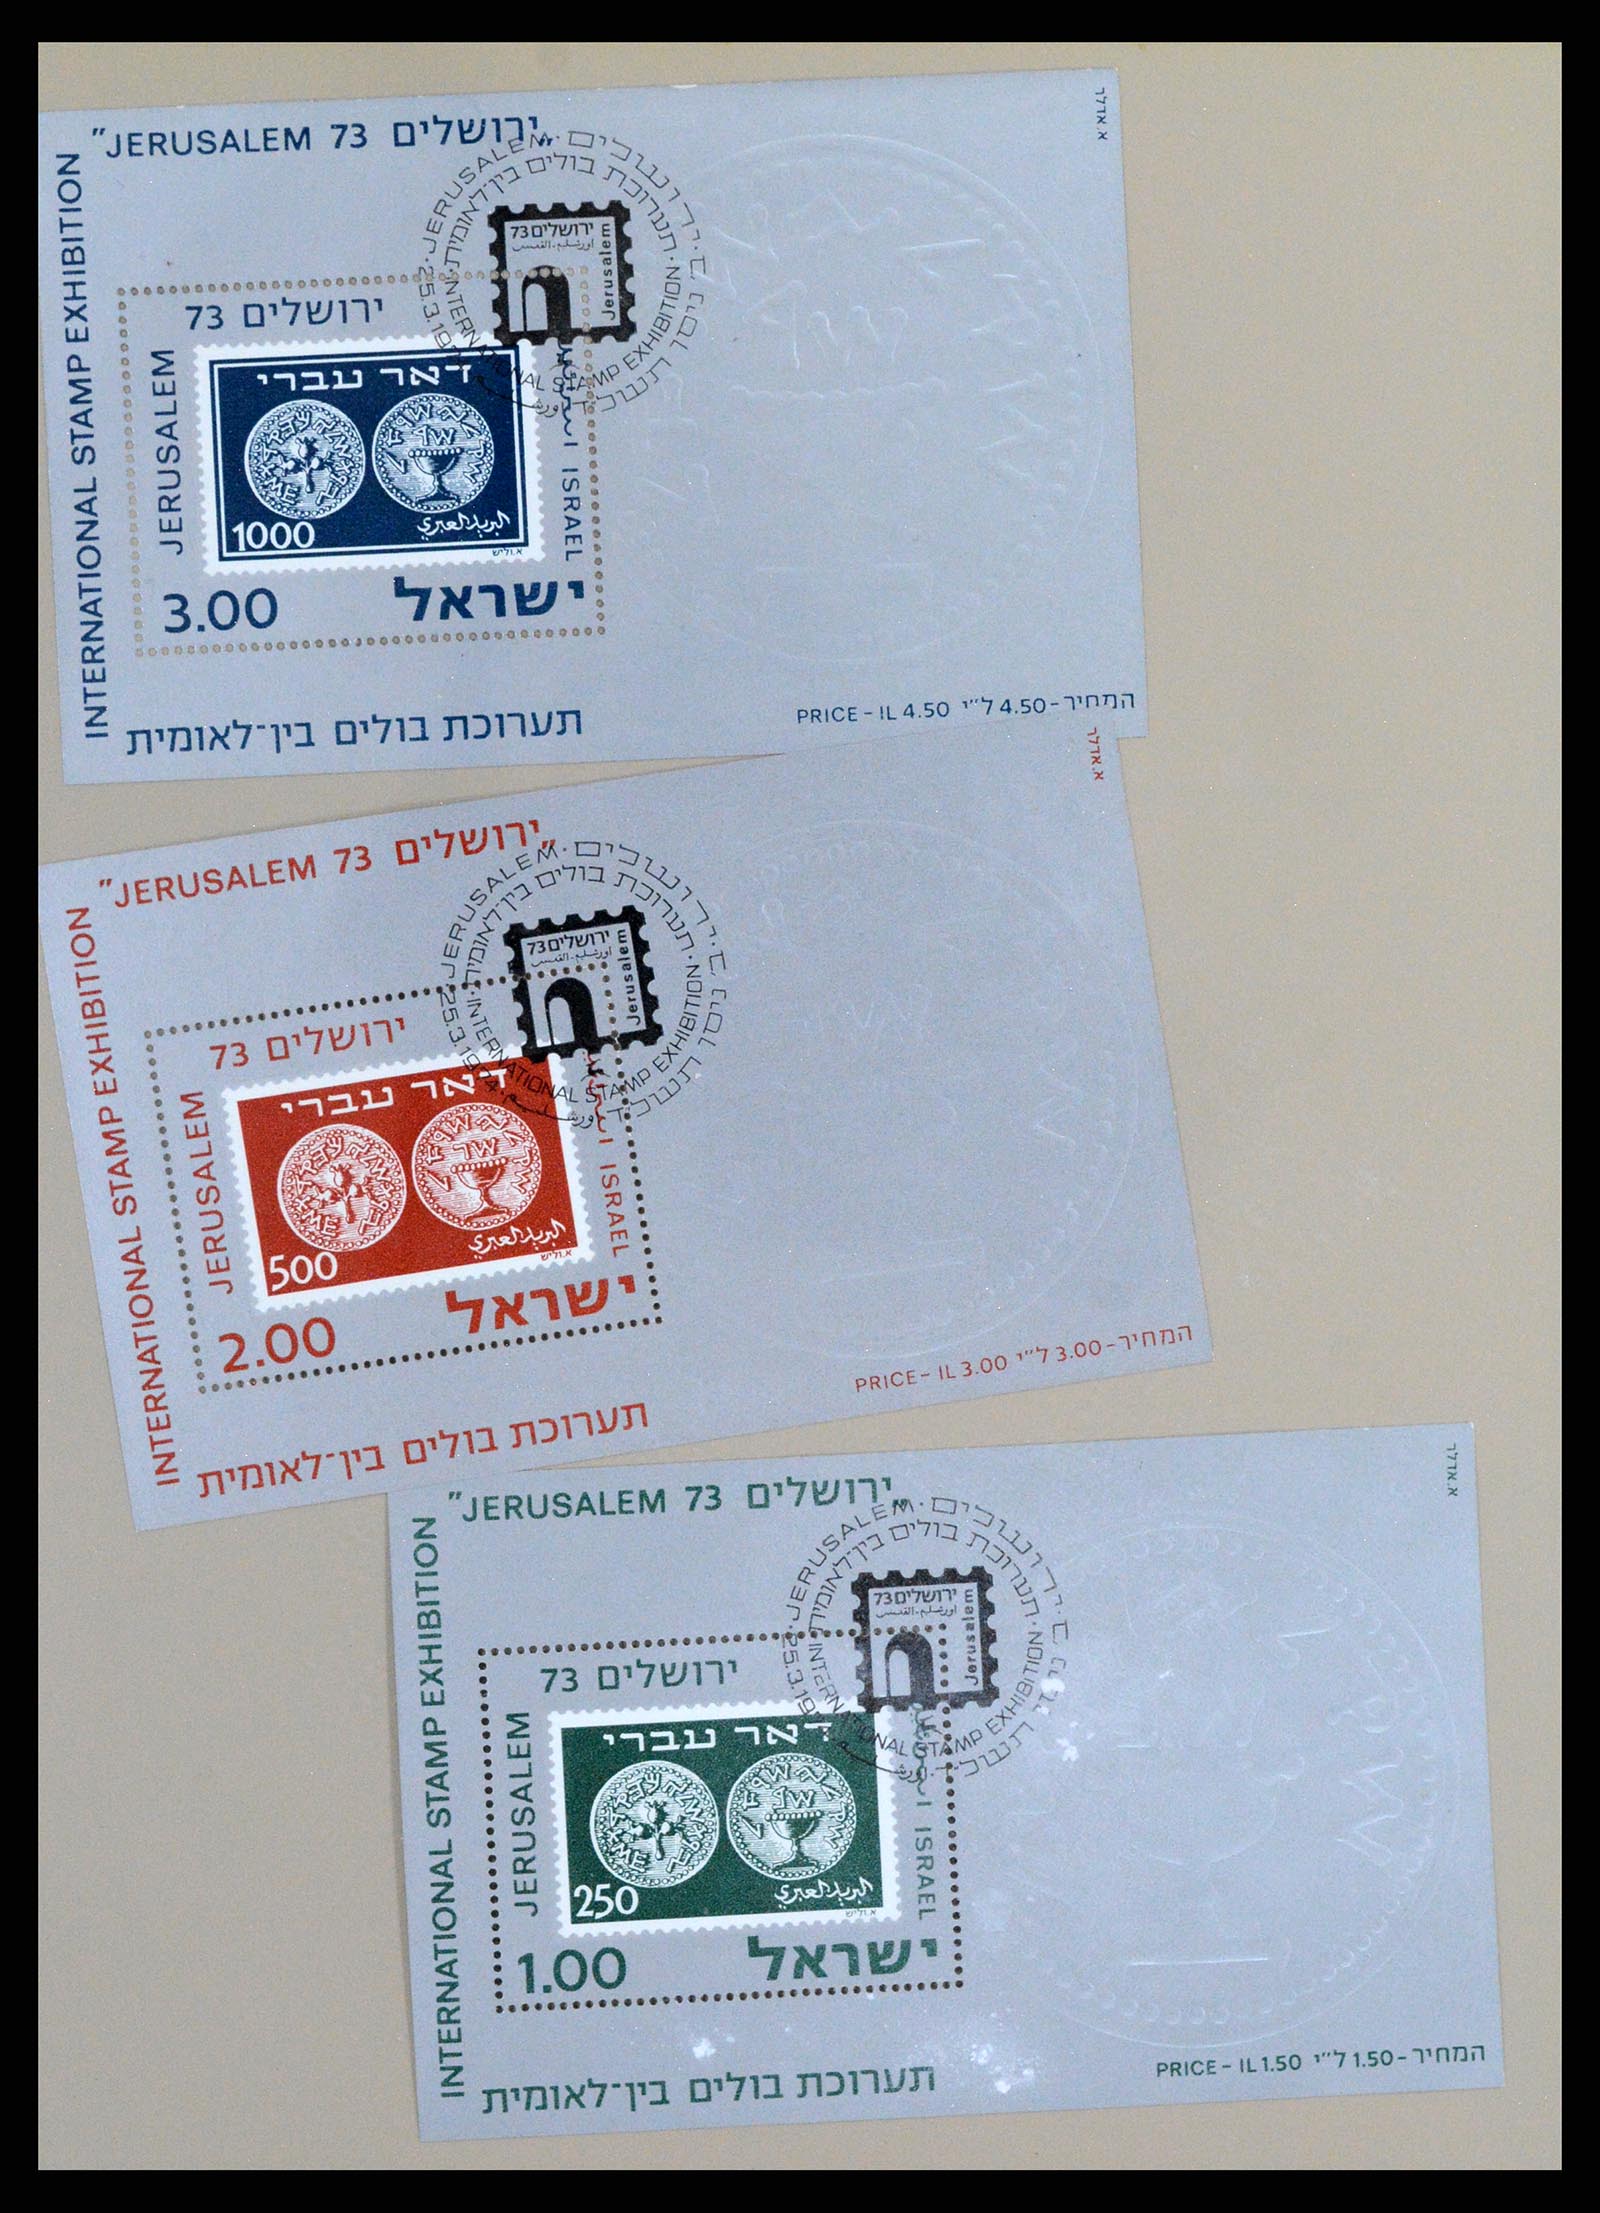 37327 020 - Stamp collection 37327 Israel souvenir sheets 1949-1995.